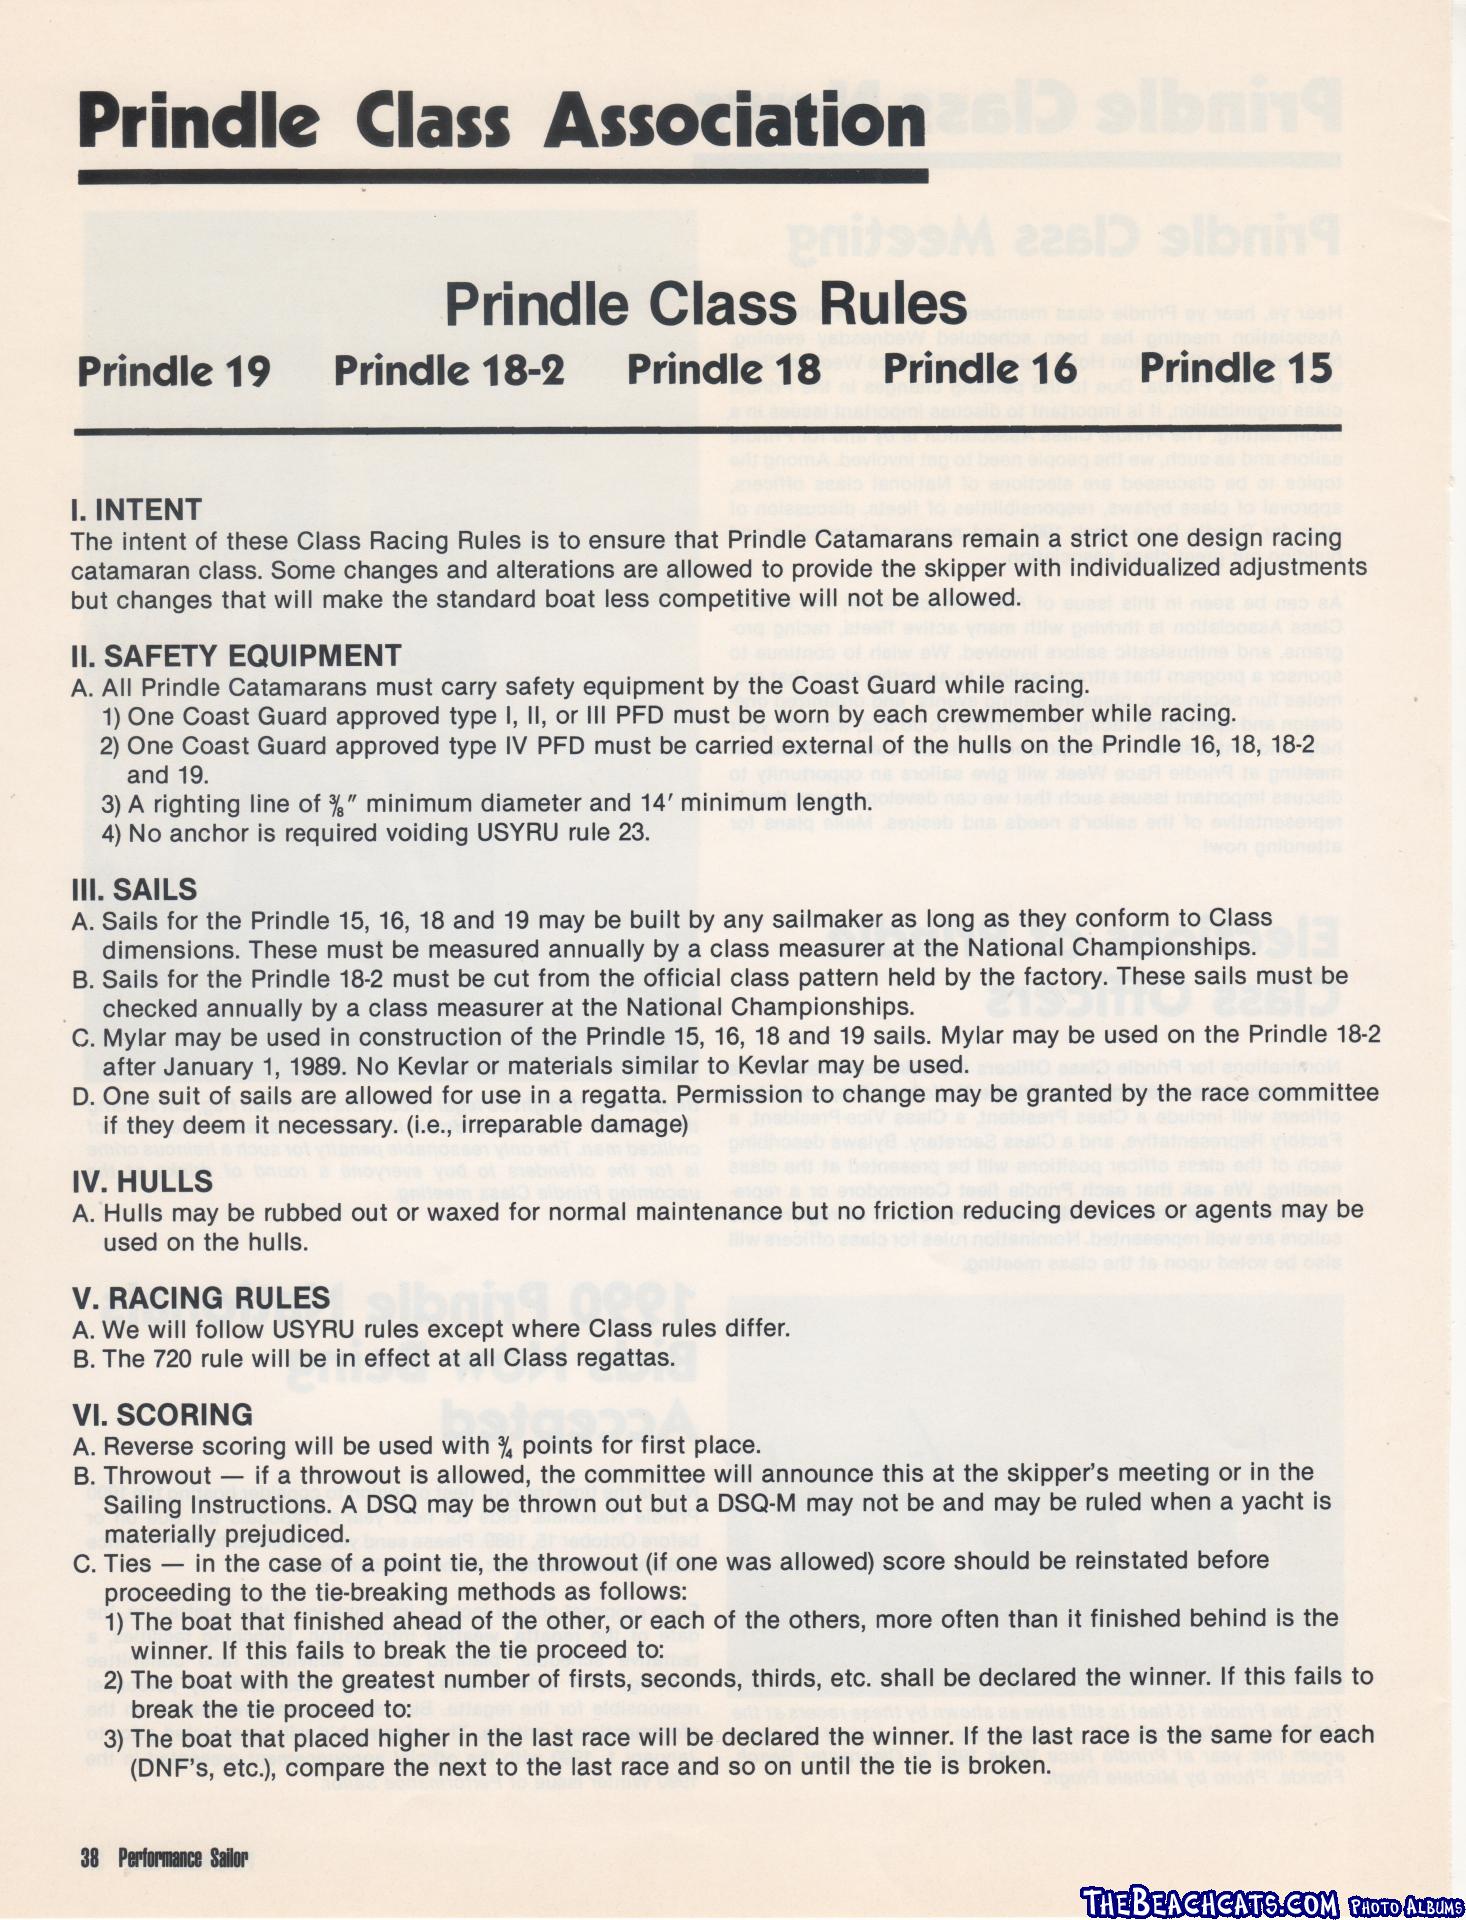 Prindle Class Rules 1989